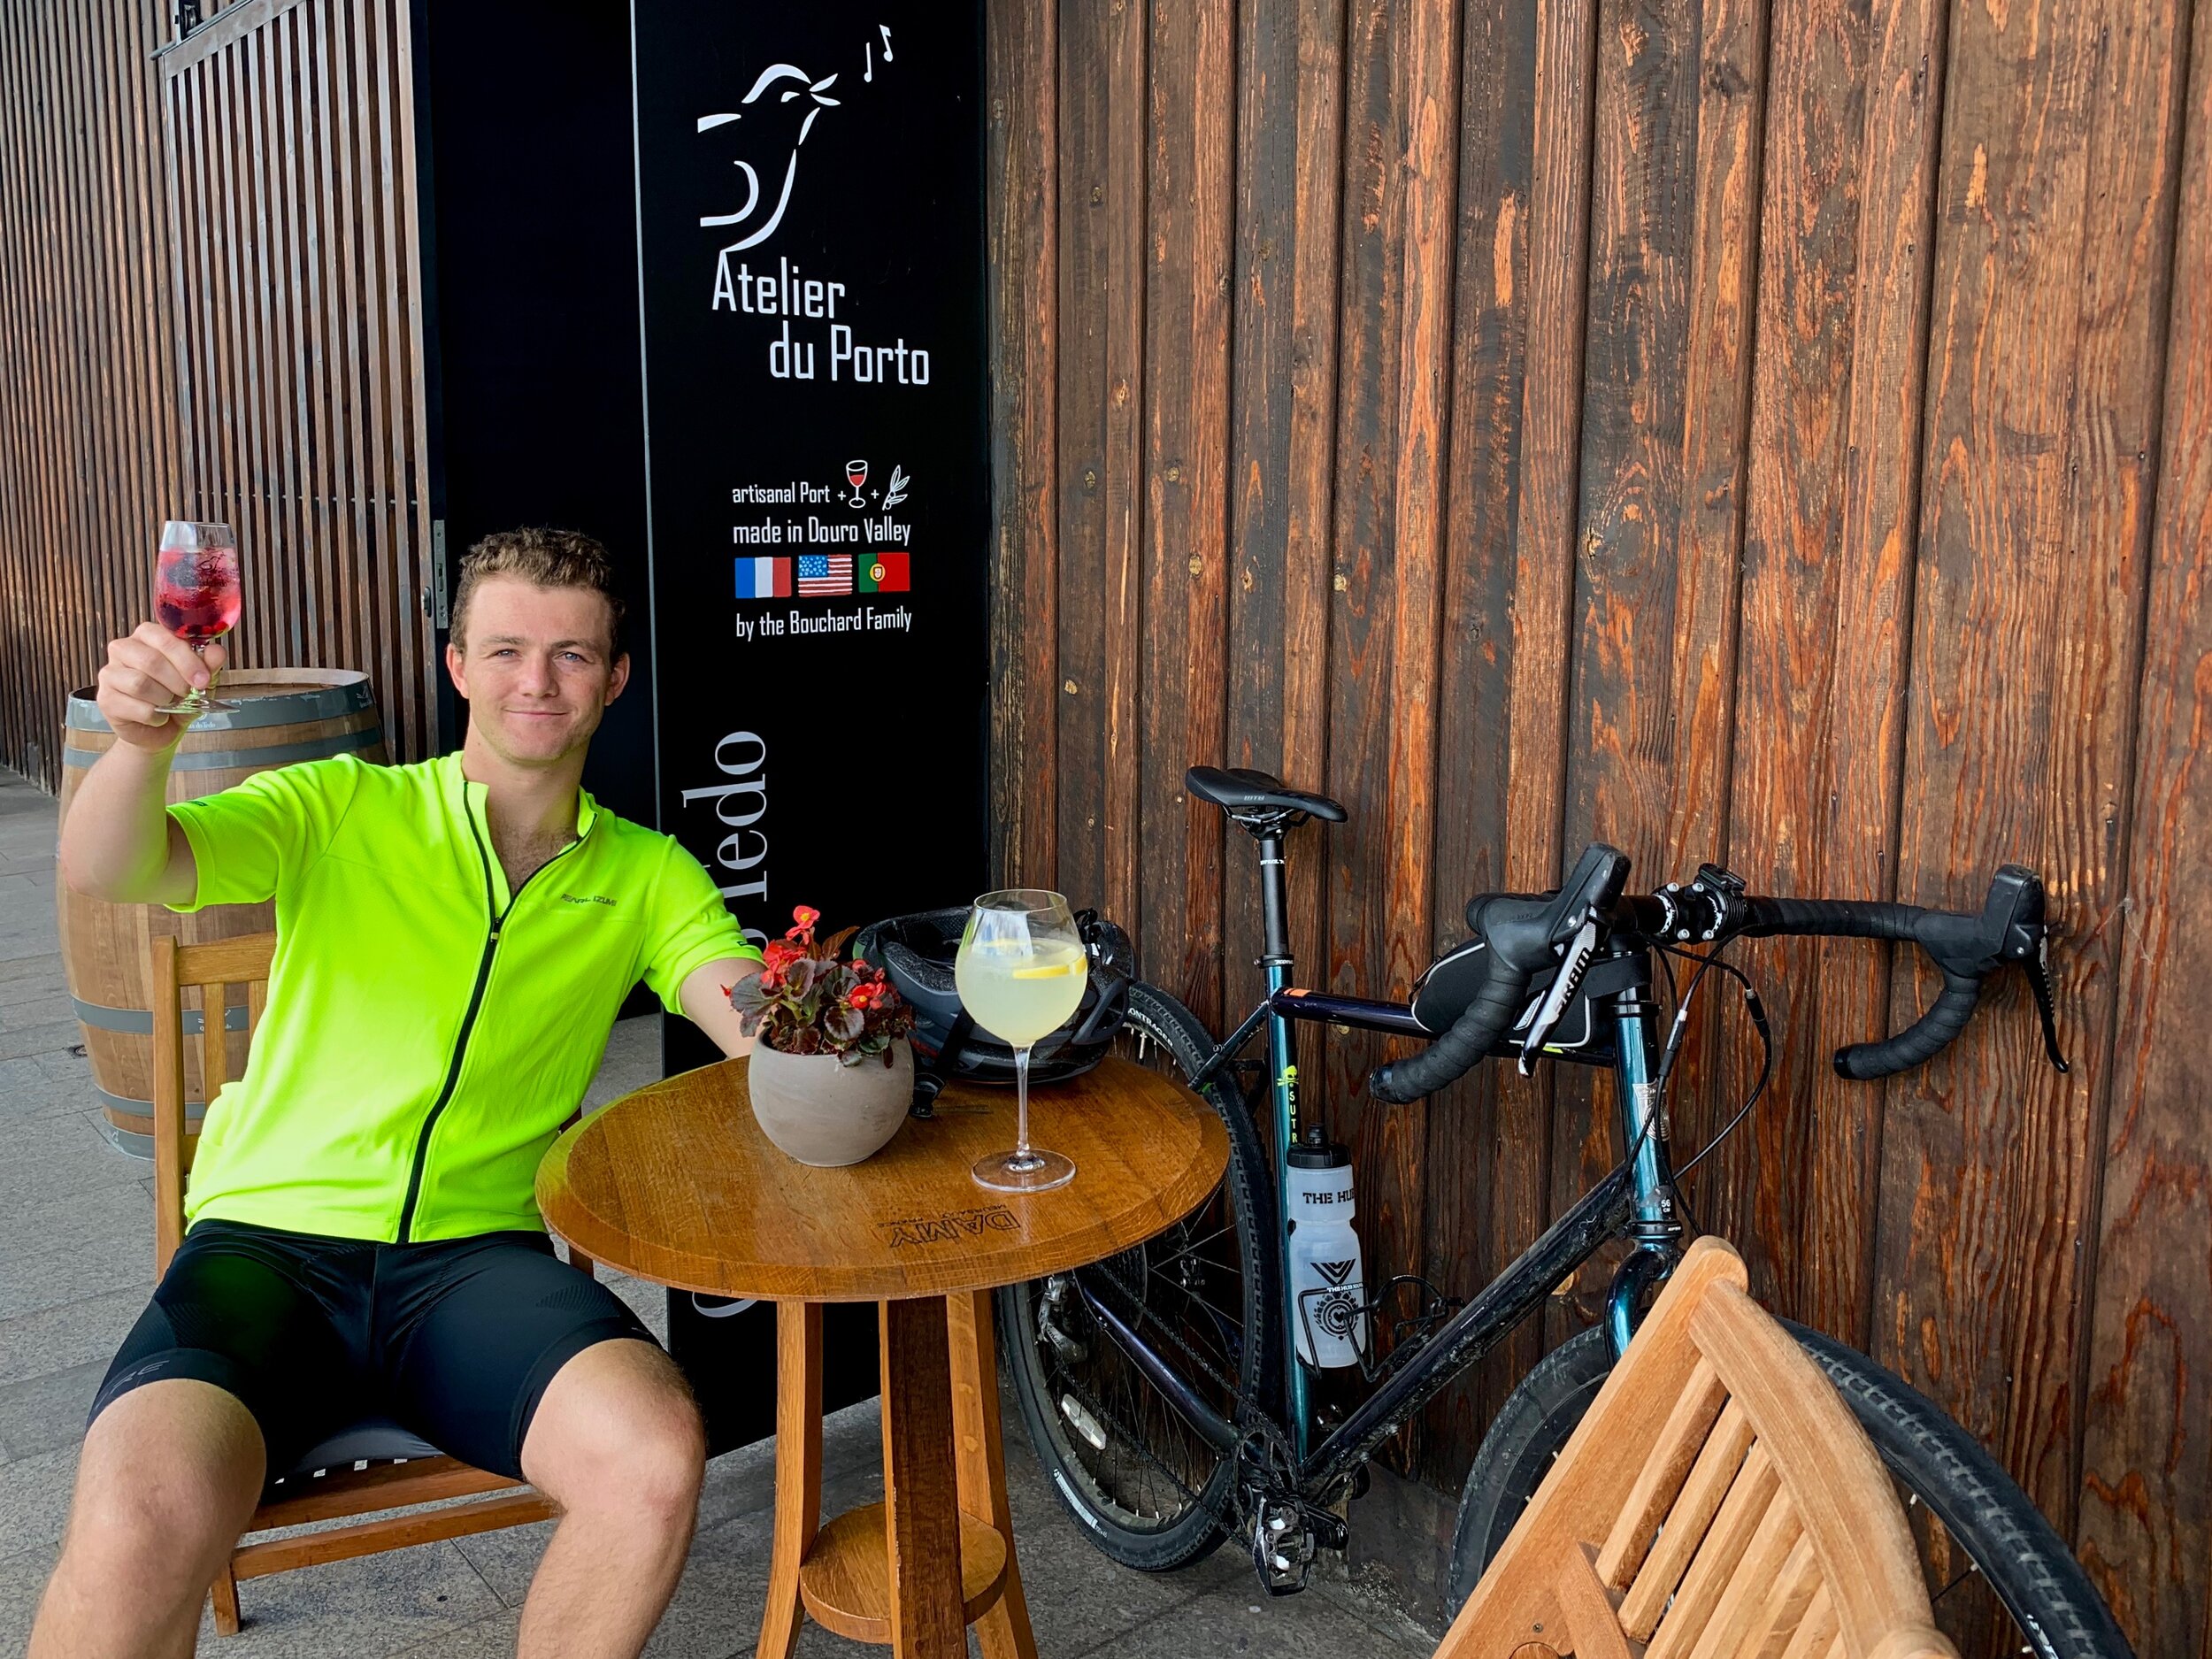 Joseph Bouchard needed a refresher after a 45 km bike ride through Douro's winding hills and valleys. (Copy)